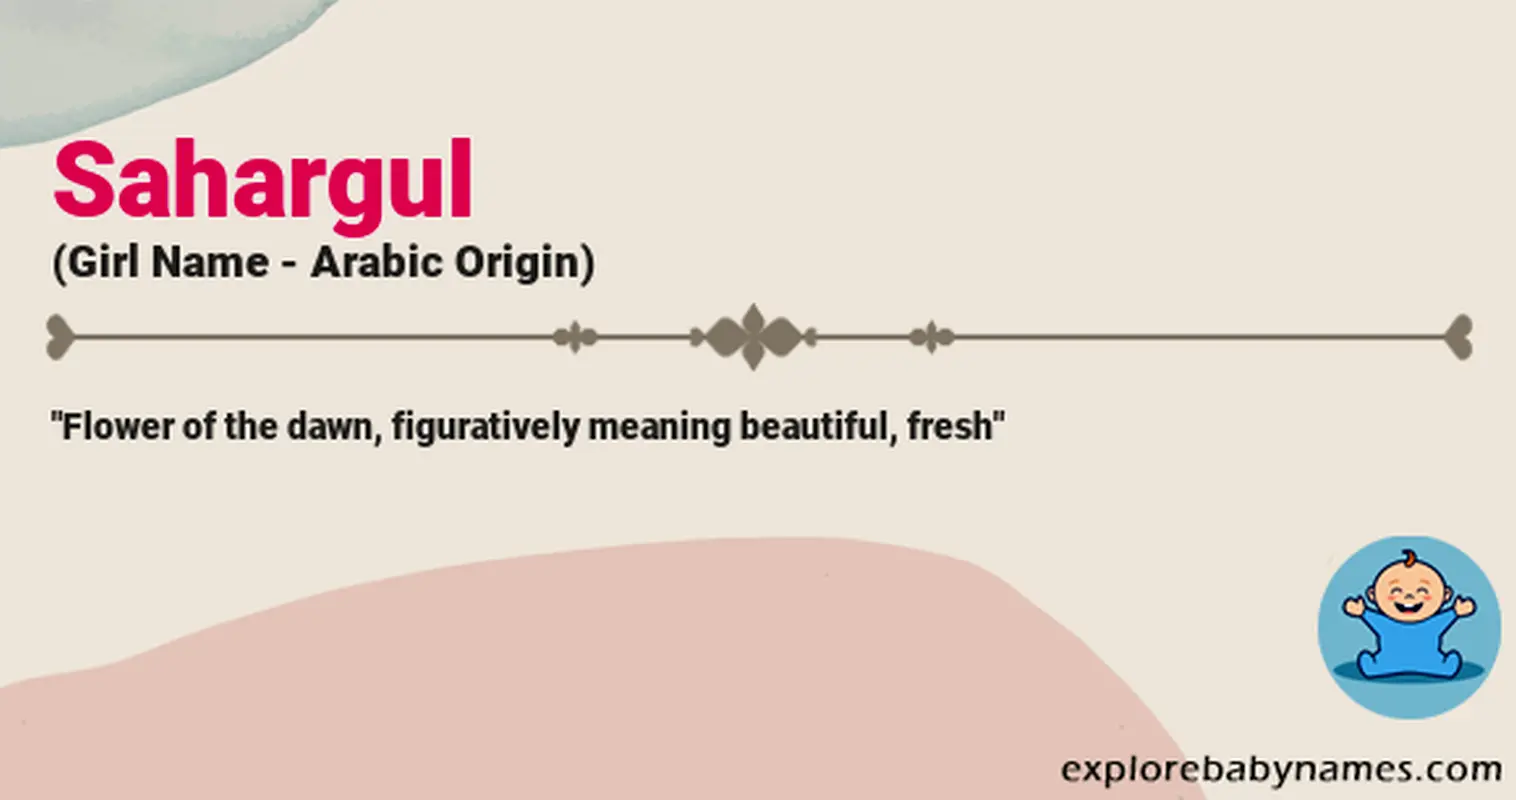 Meaning of Sahargul